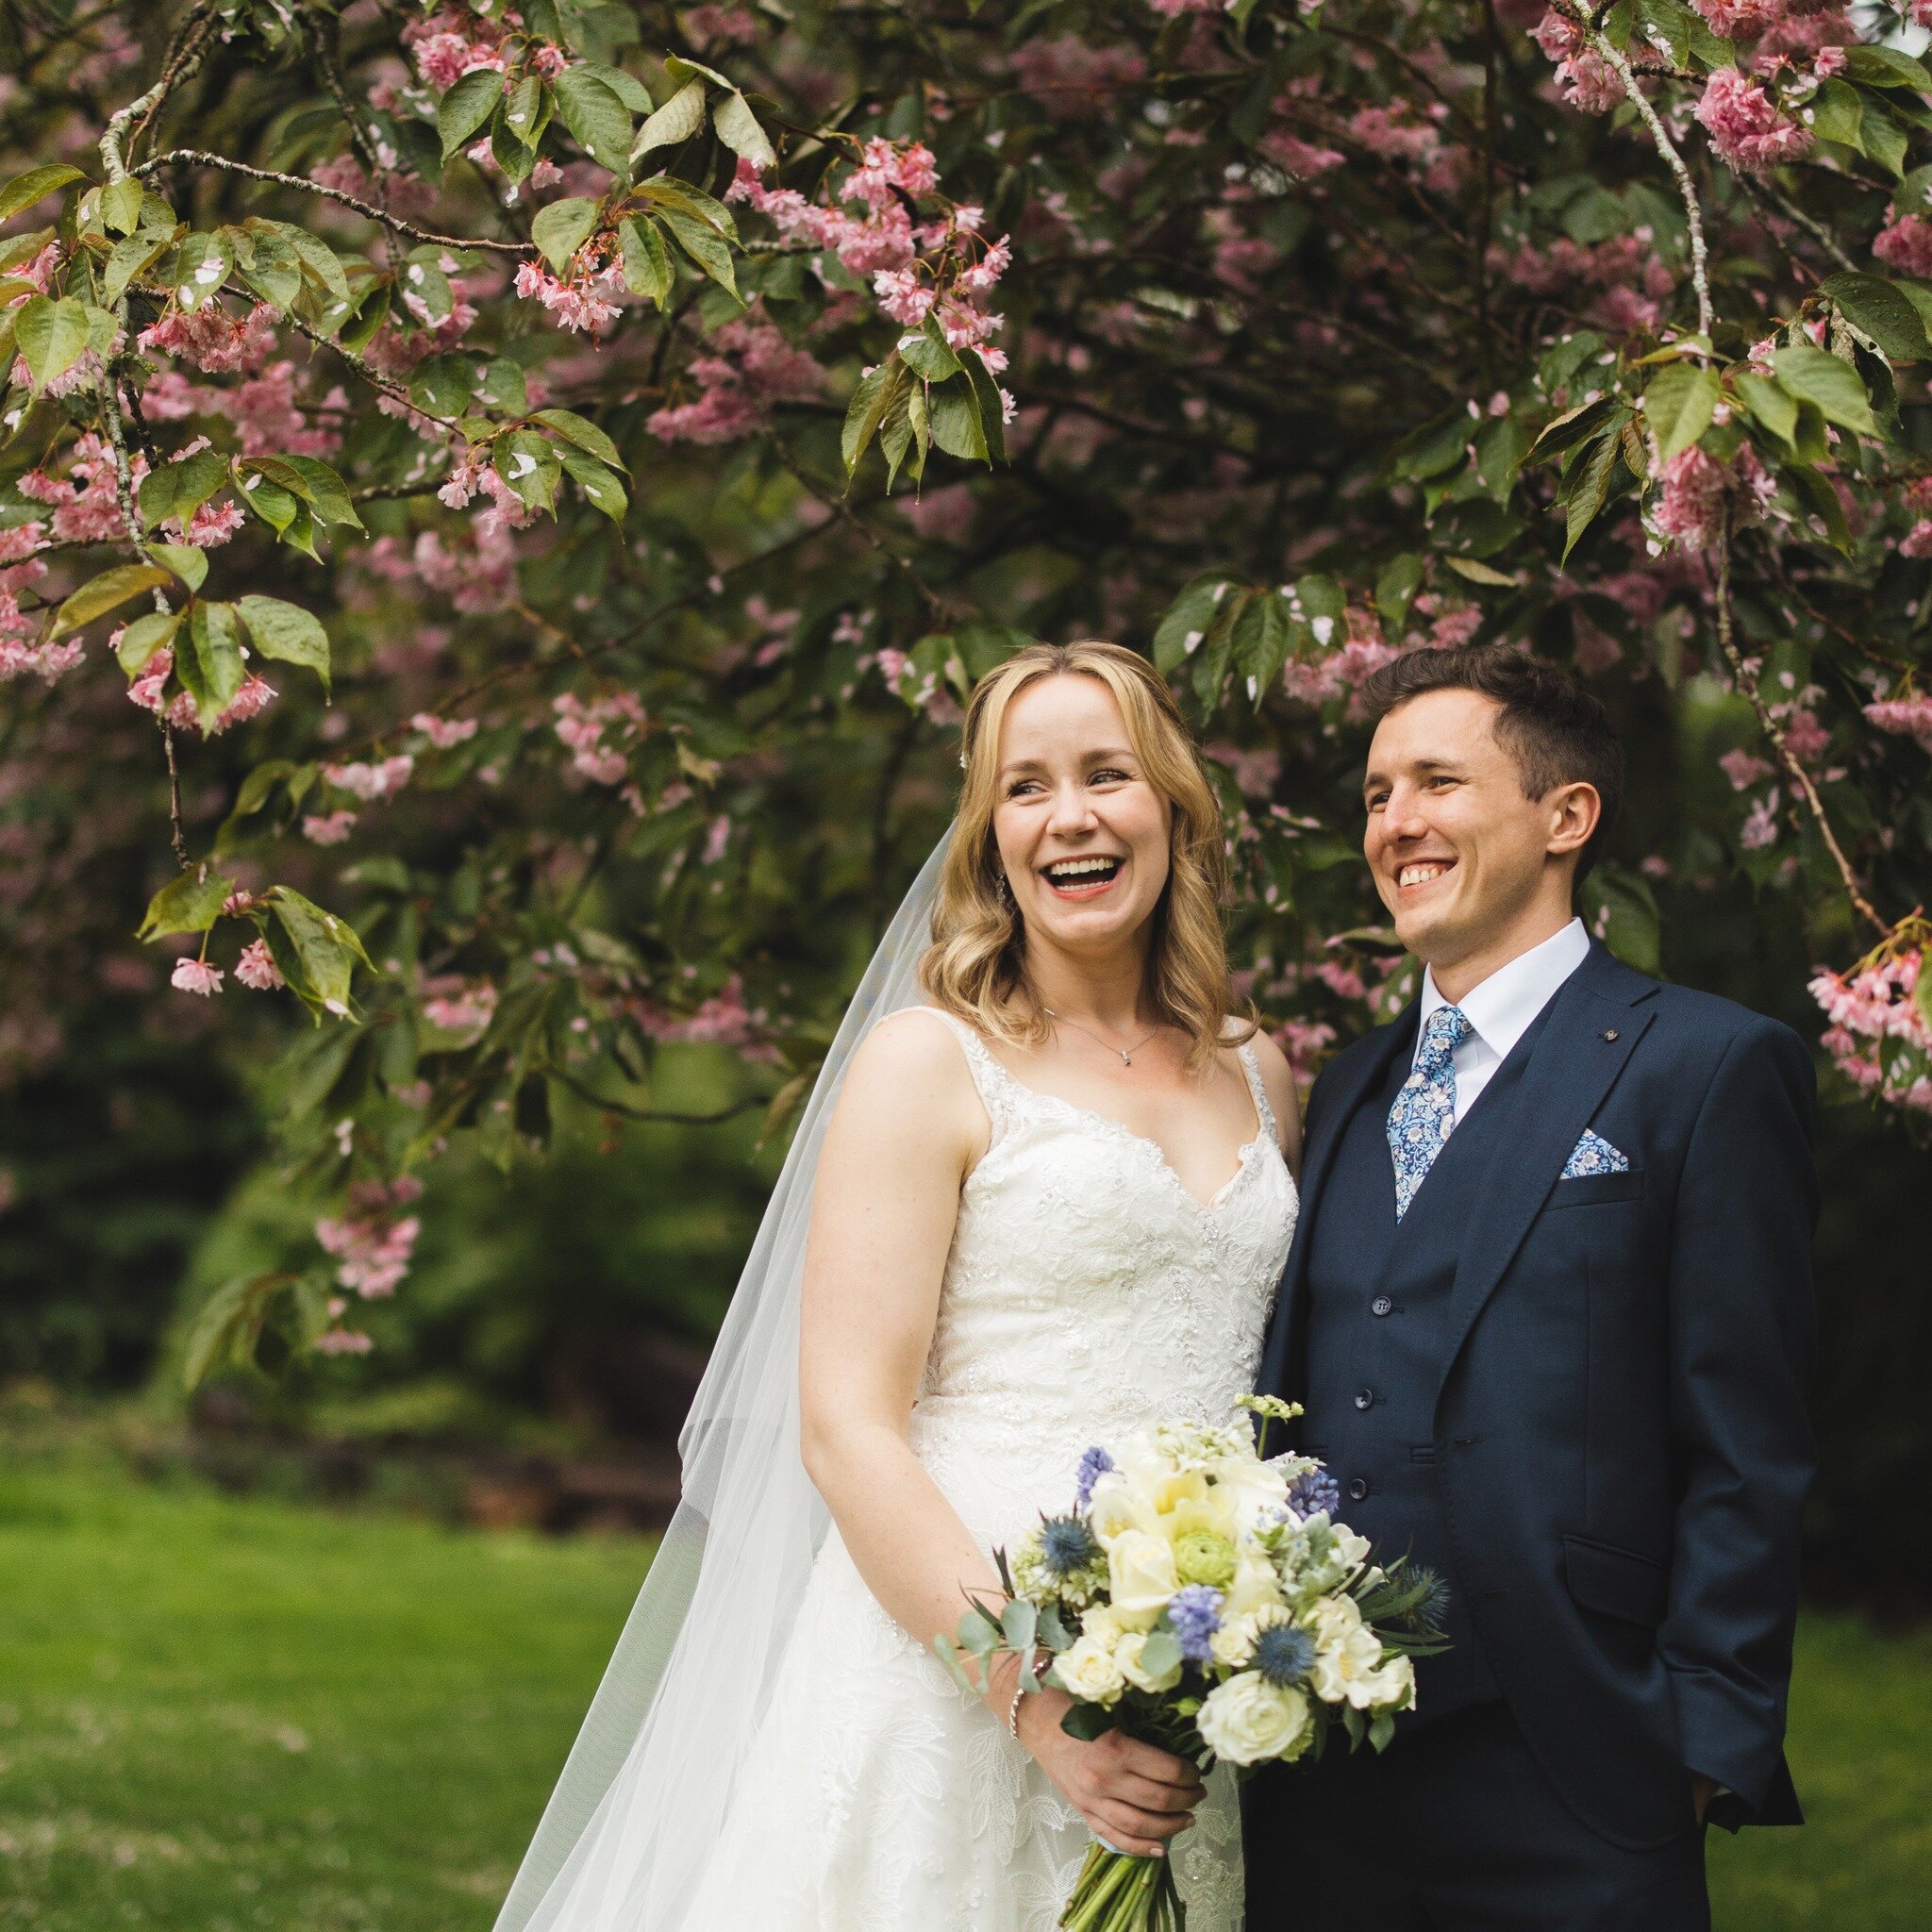 A little break in the rain meant dashing out with Katherine &amp; Thomas to get some pictures under this gorgeous blossom 🌸 

Planner: @jessicaghansahweddings 
Venue: @woodlandmanorweddings 
Dress: @bridalreloved 
Suit: @waterersmenswear 
Hair: @ale